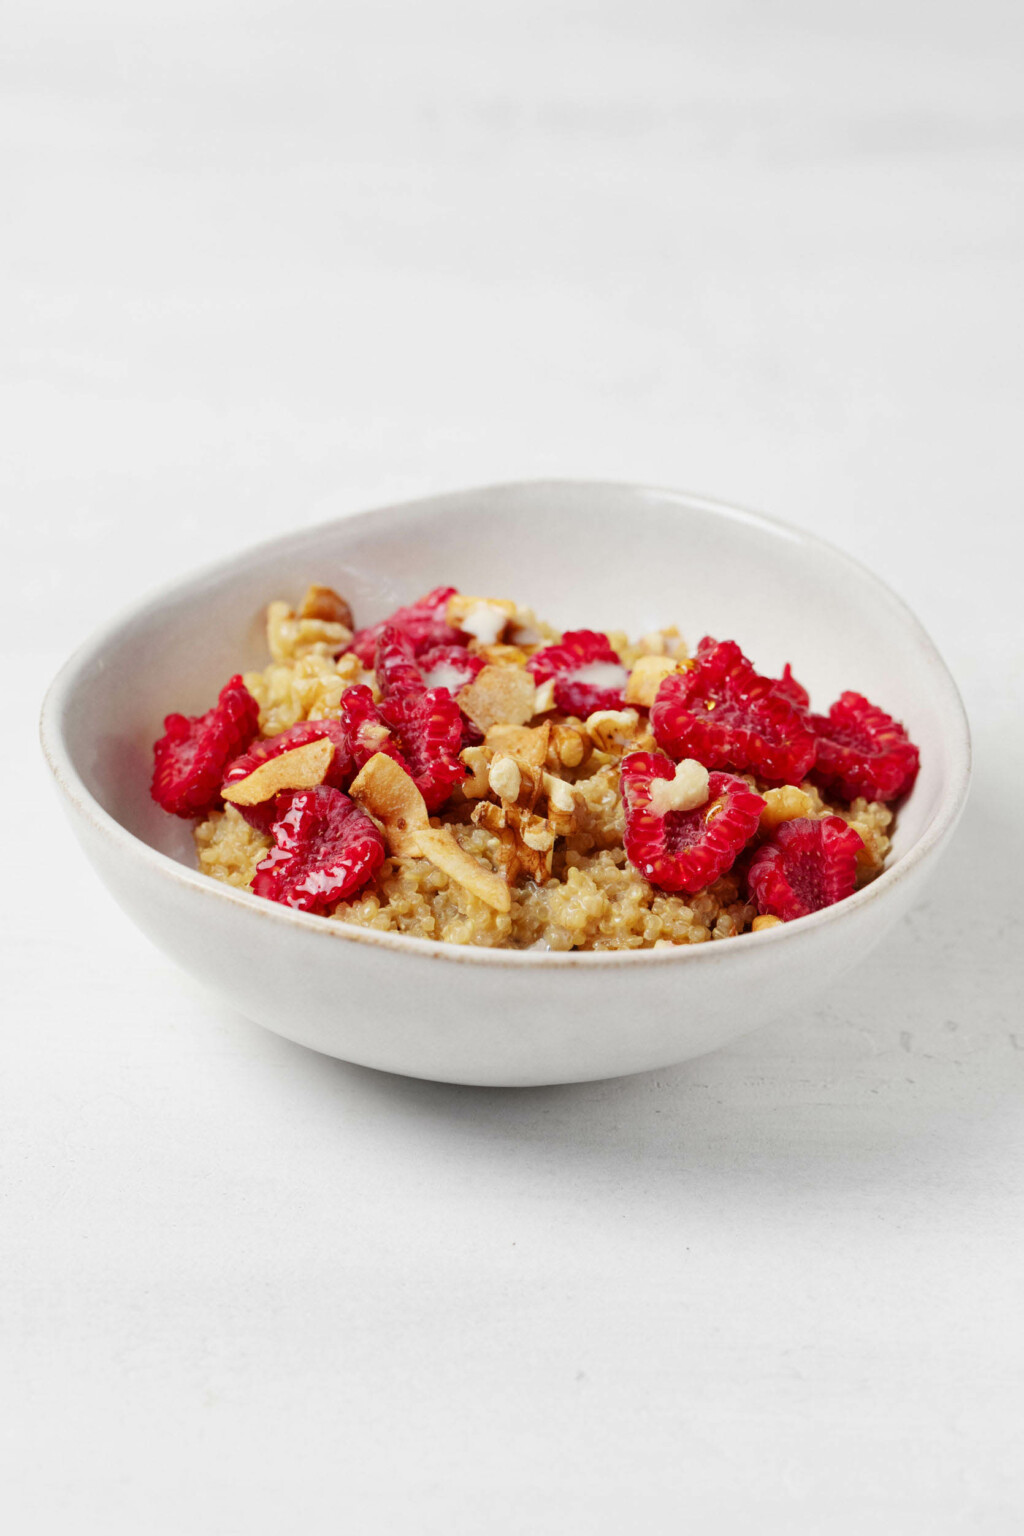 A round bowl is resting on a white surface. It's filled with maple vanilla quinoa porridge, raspberries, and chopped nuts.